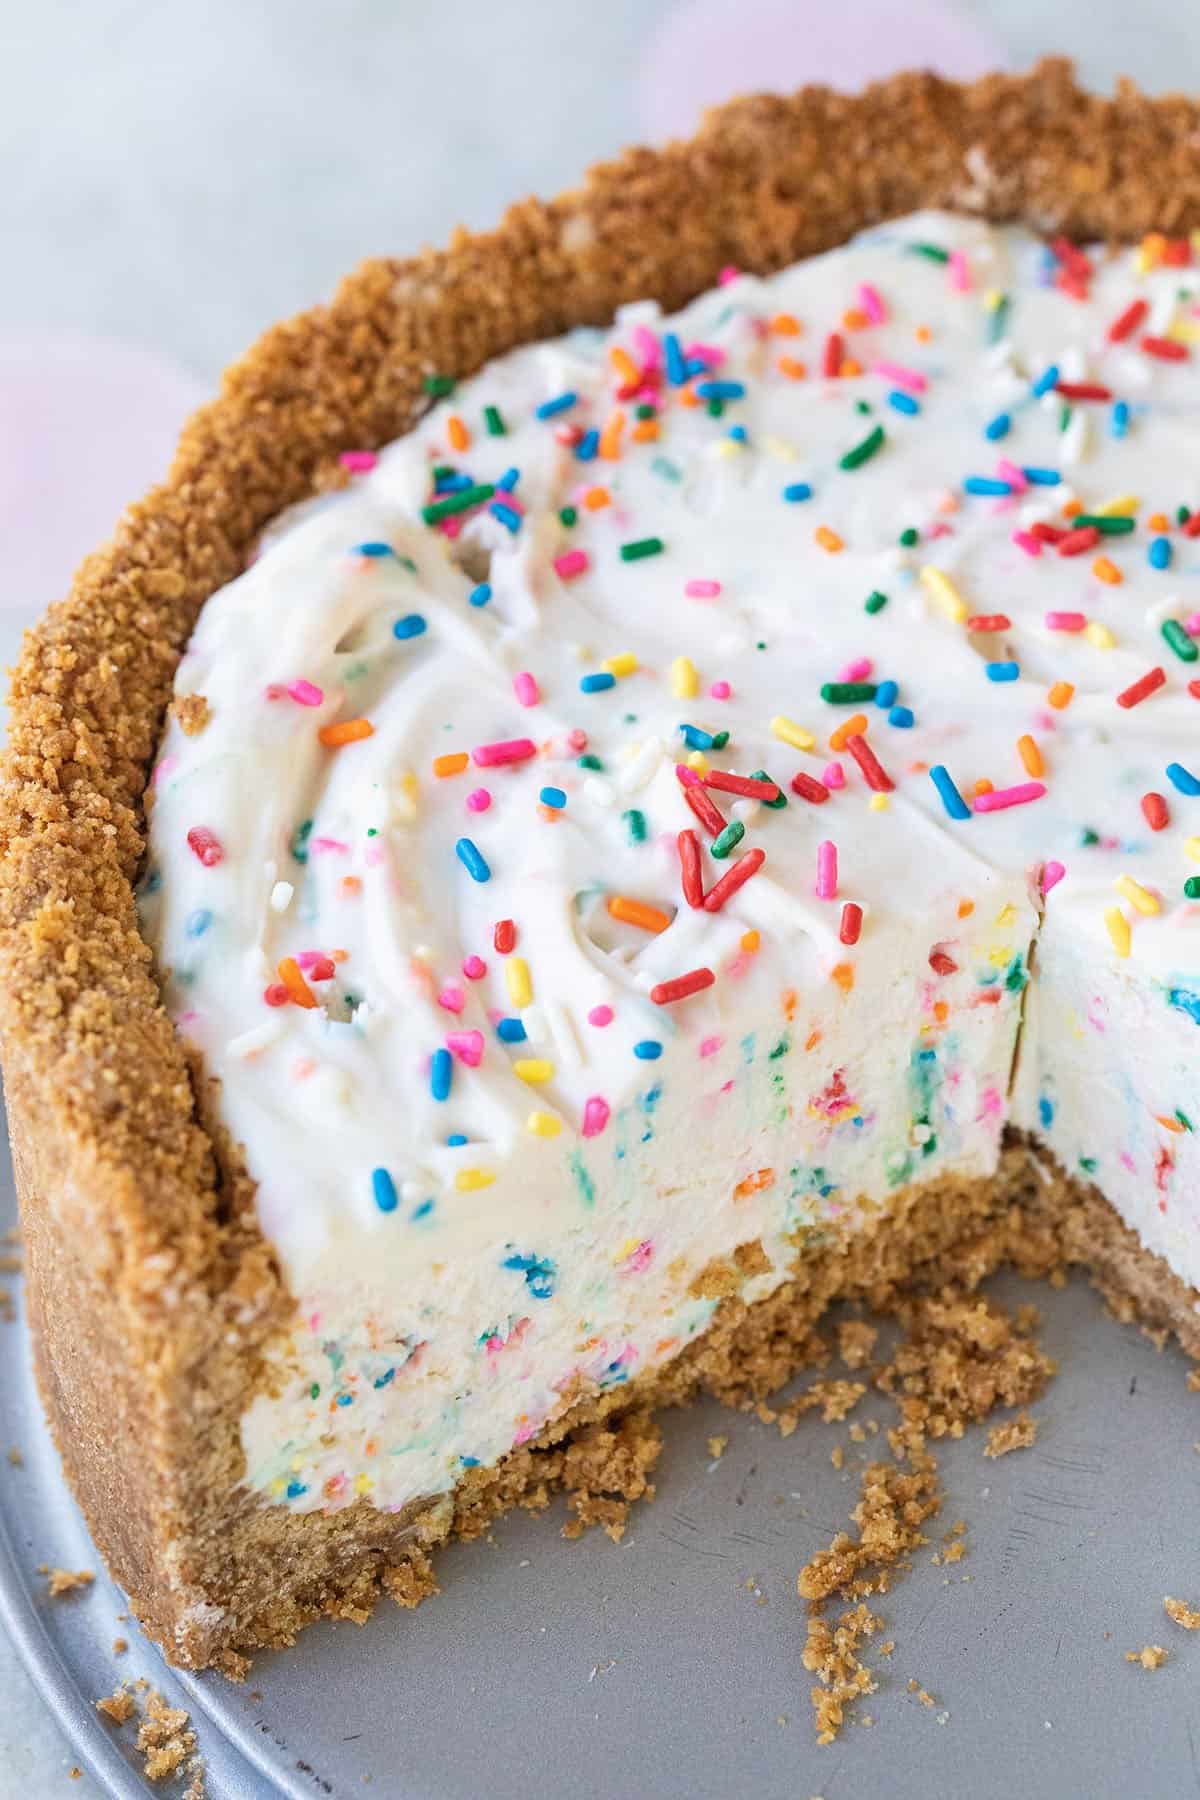 No-bake cheesecake with sprinkles.